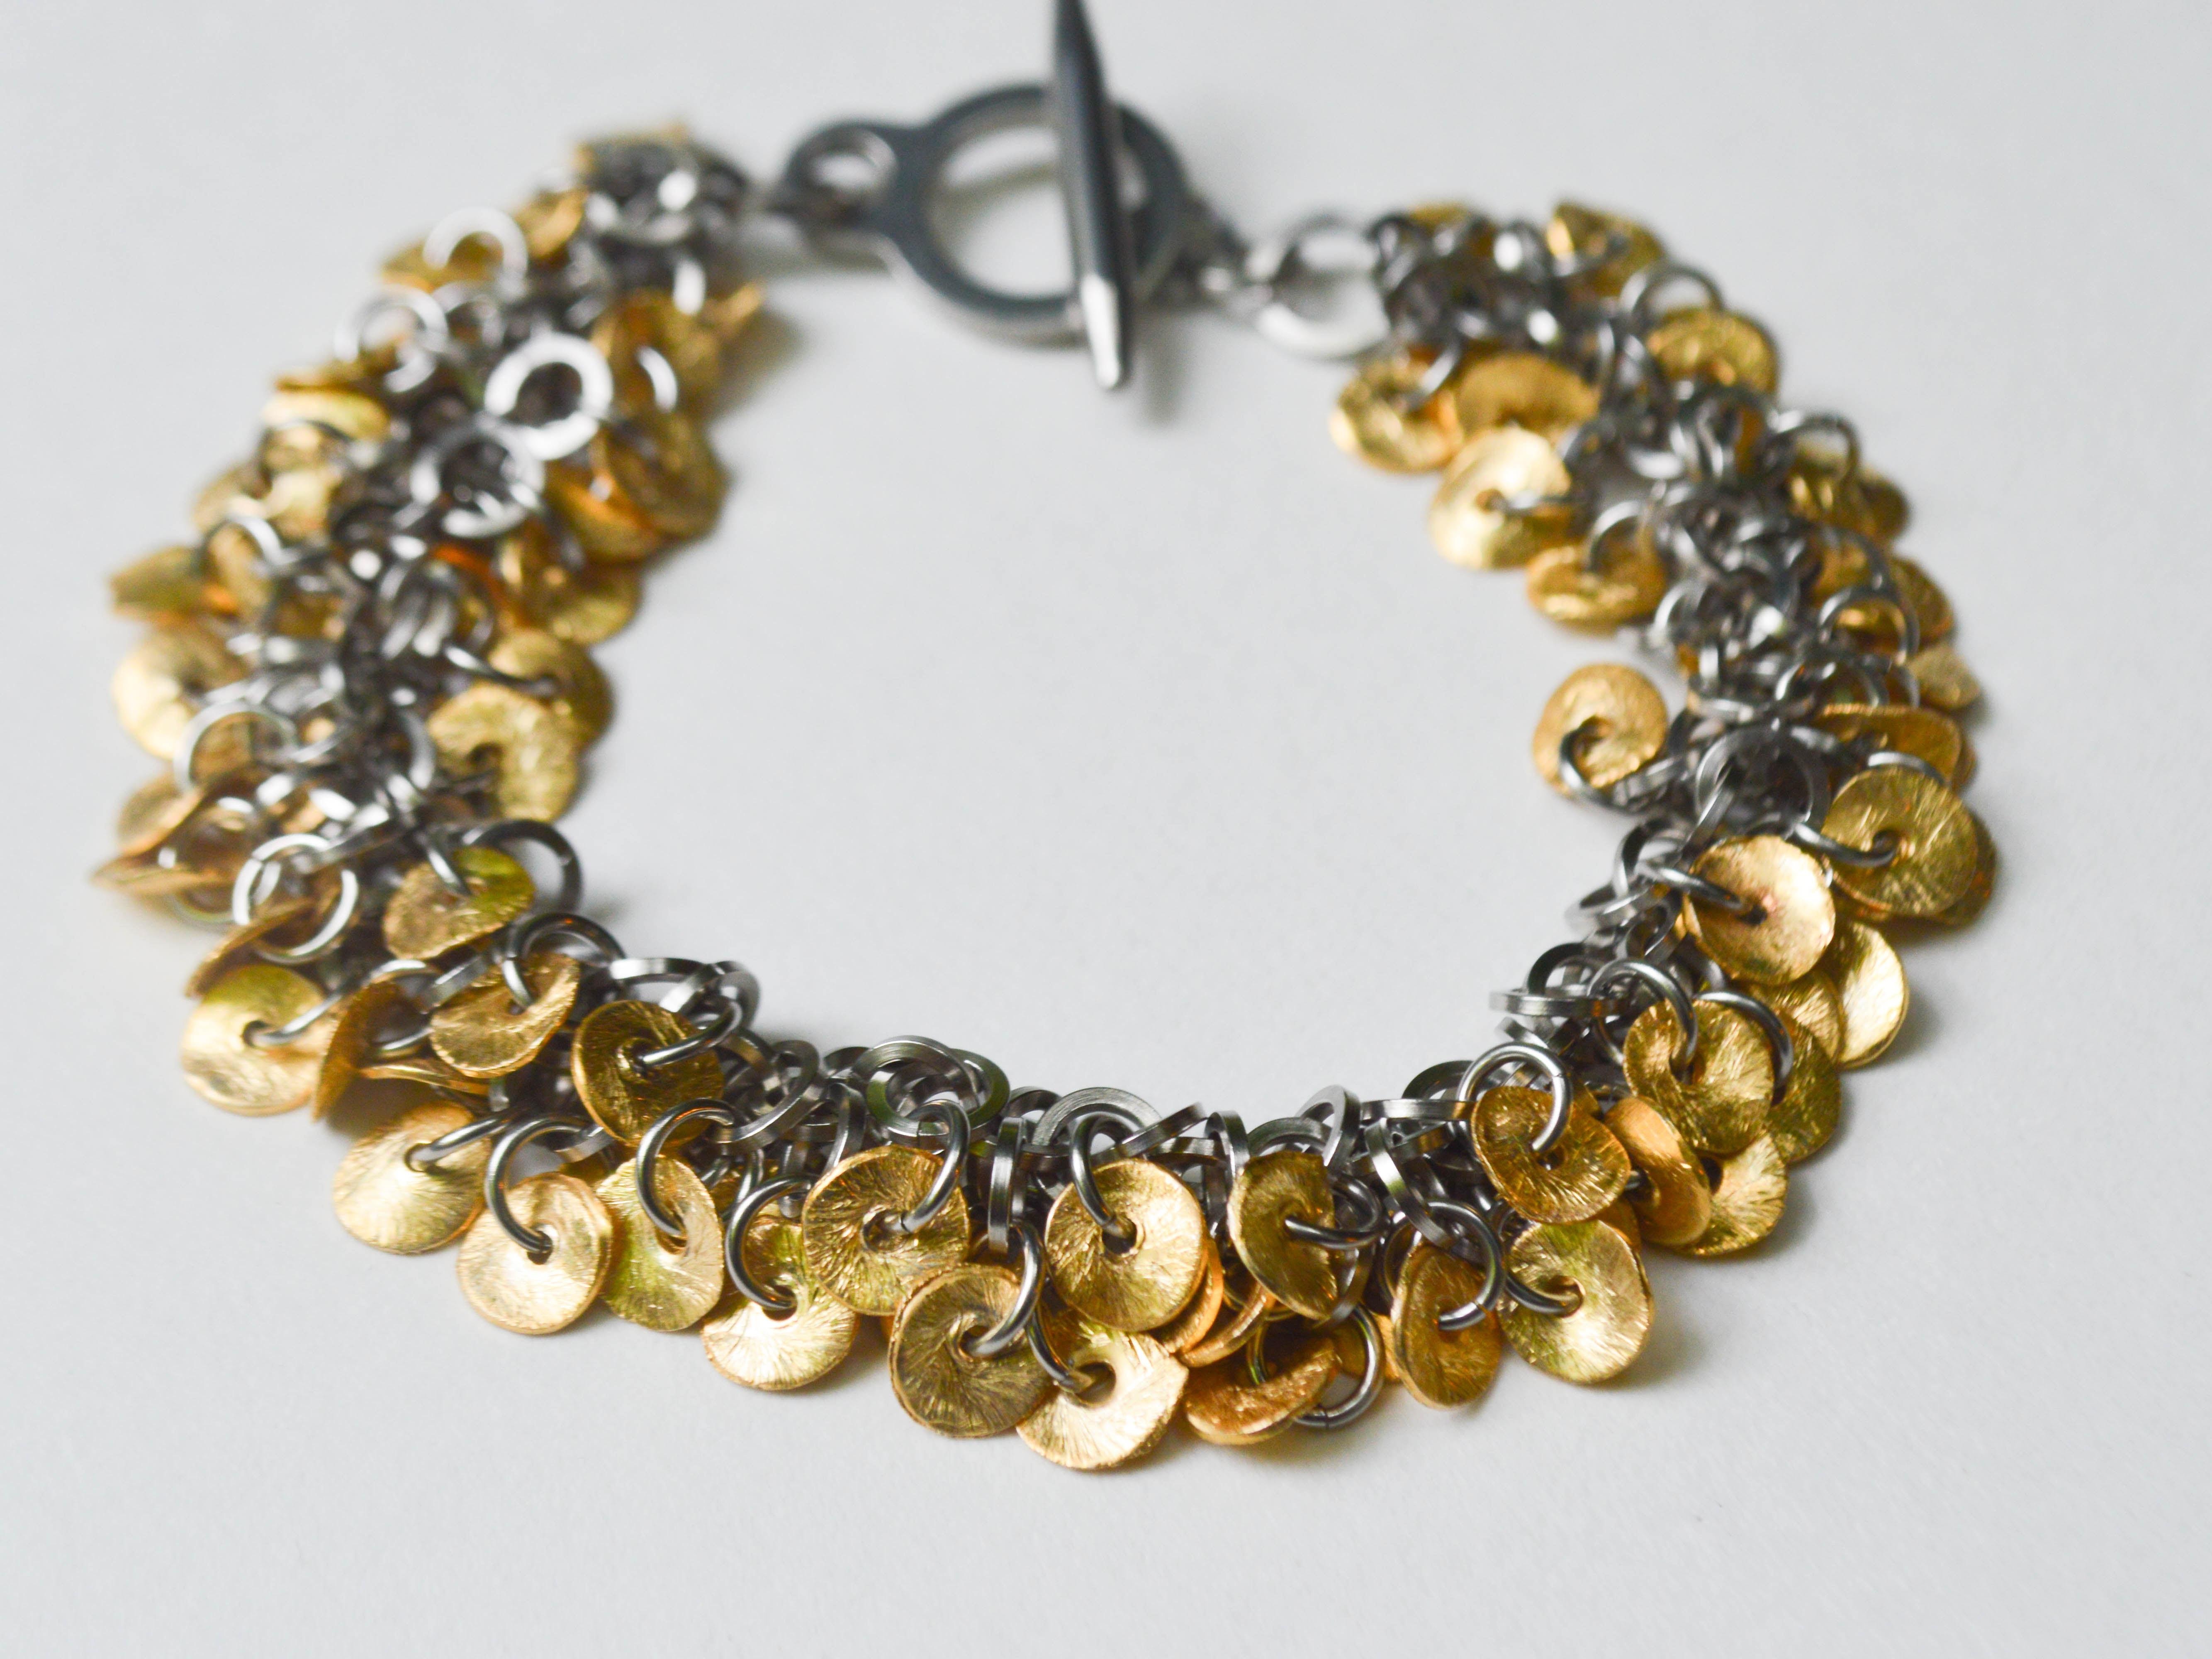 Stainless Steel Bracelet with Gold Dangles